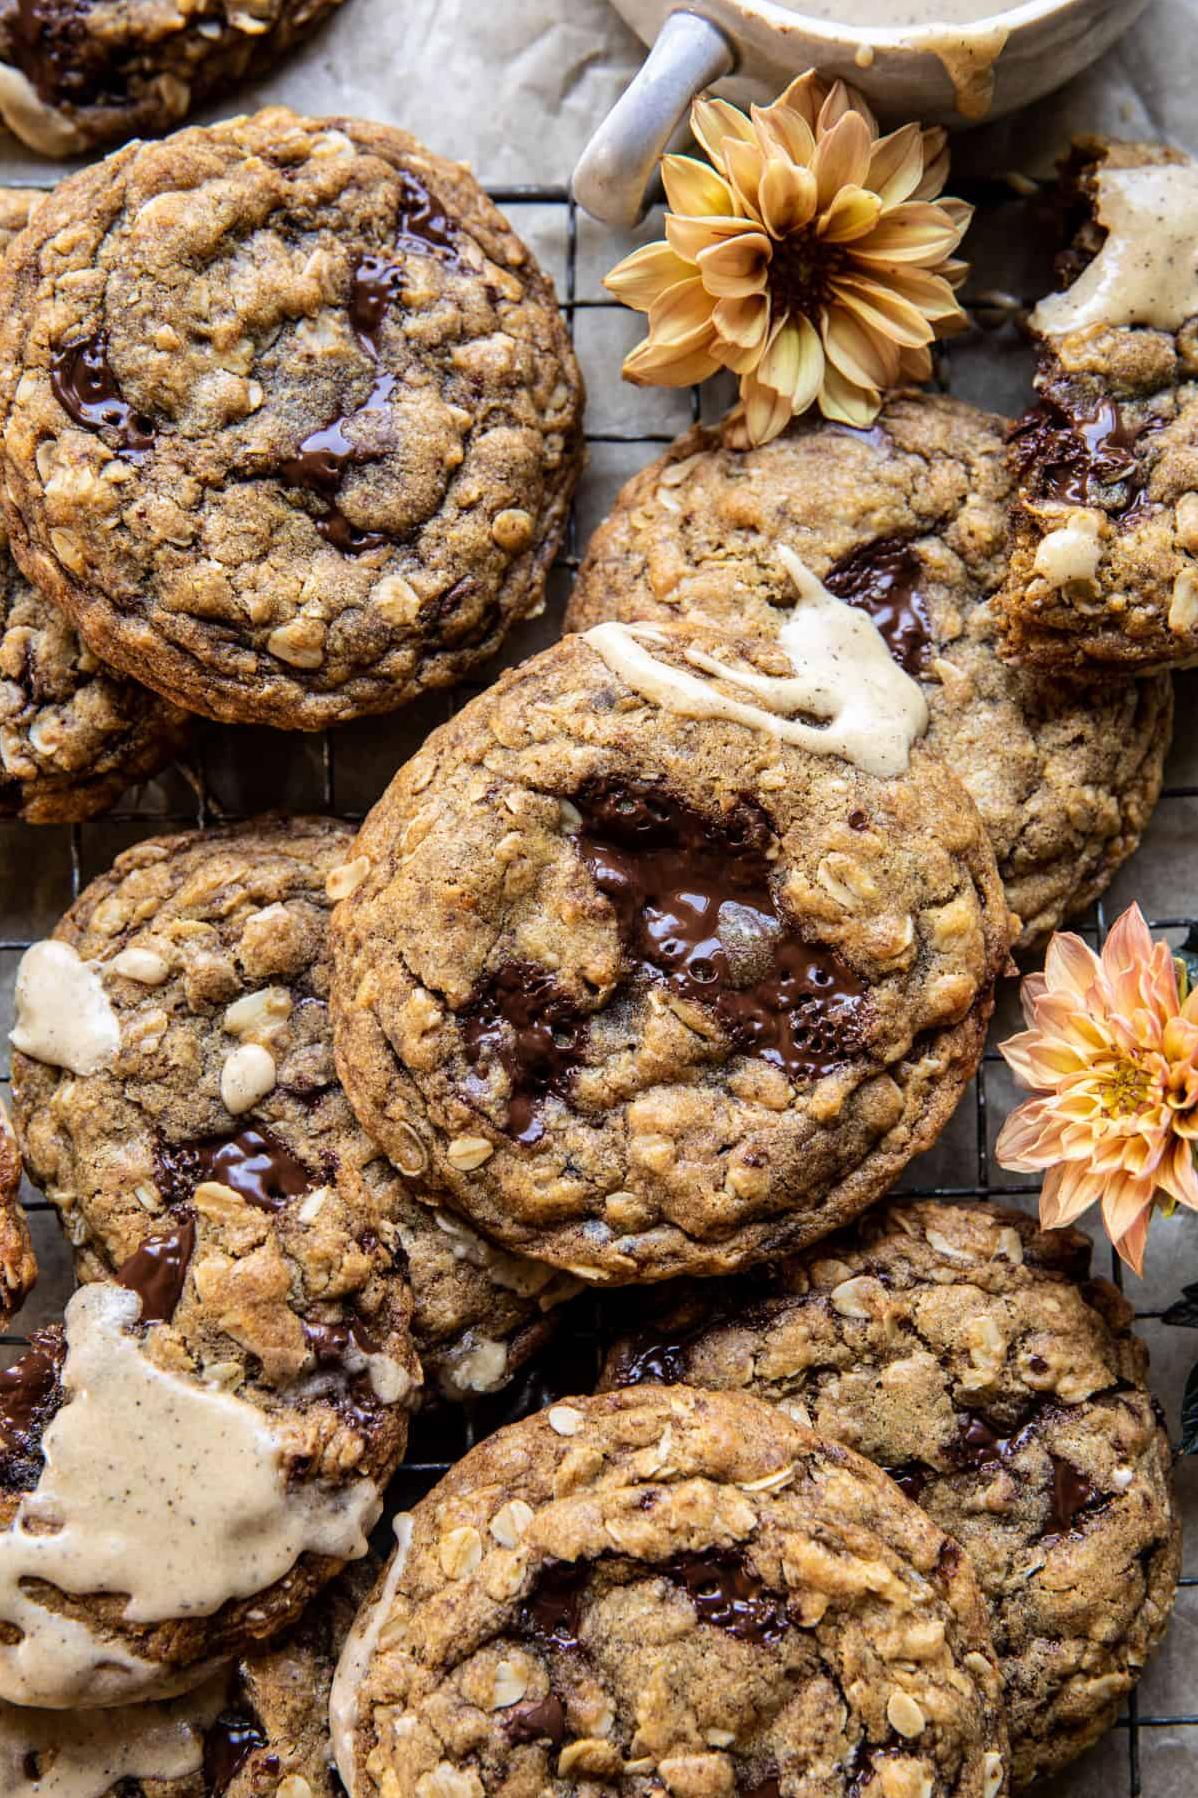  Cookies so good, you'll want to lick the crumbs off your fingers